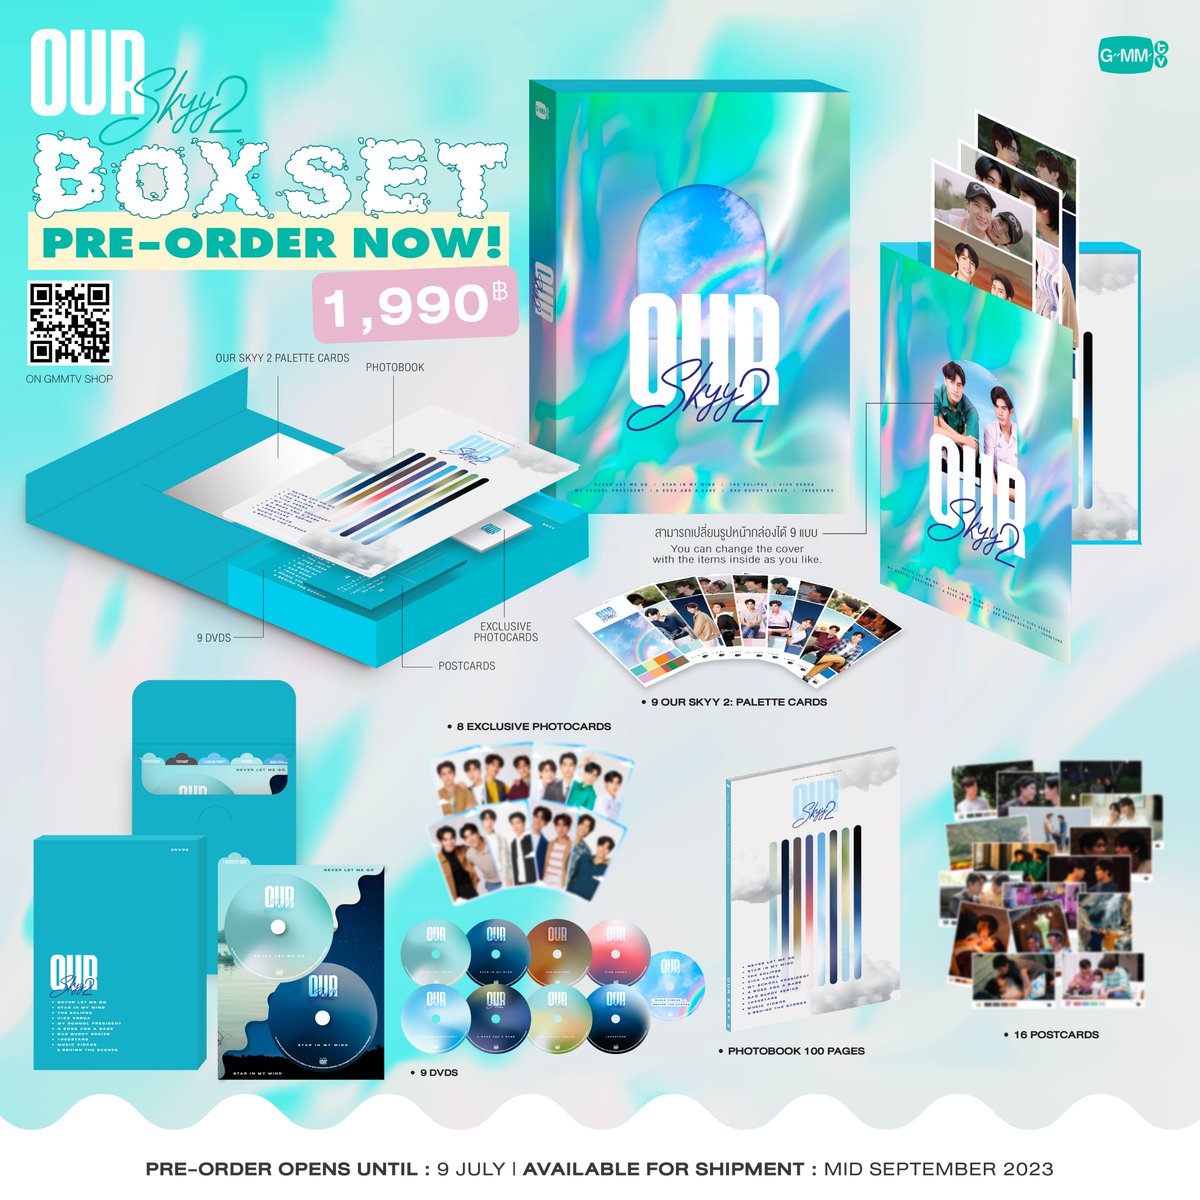 PRE-ORDER NOW! DVD BOXSET OUR SKYY2 ON GMMTV SHOP ☁️

☁️ DVD BOXSET OUR SKYY2
gmm-tv.com/shop/dvd-boxse…

Pre-order opens now until July 9, 2023.
All purchase orders will be shipped sequentially starting from mid September 2023.

#OurSkyy2
#GMMTV